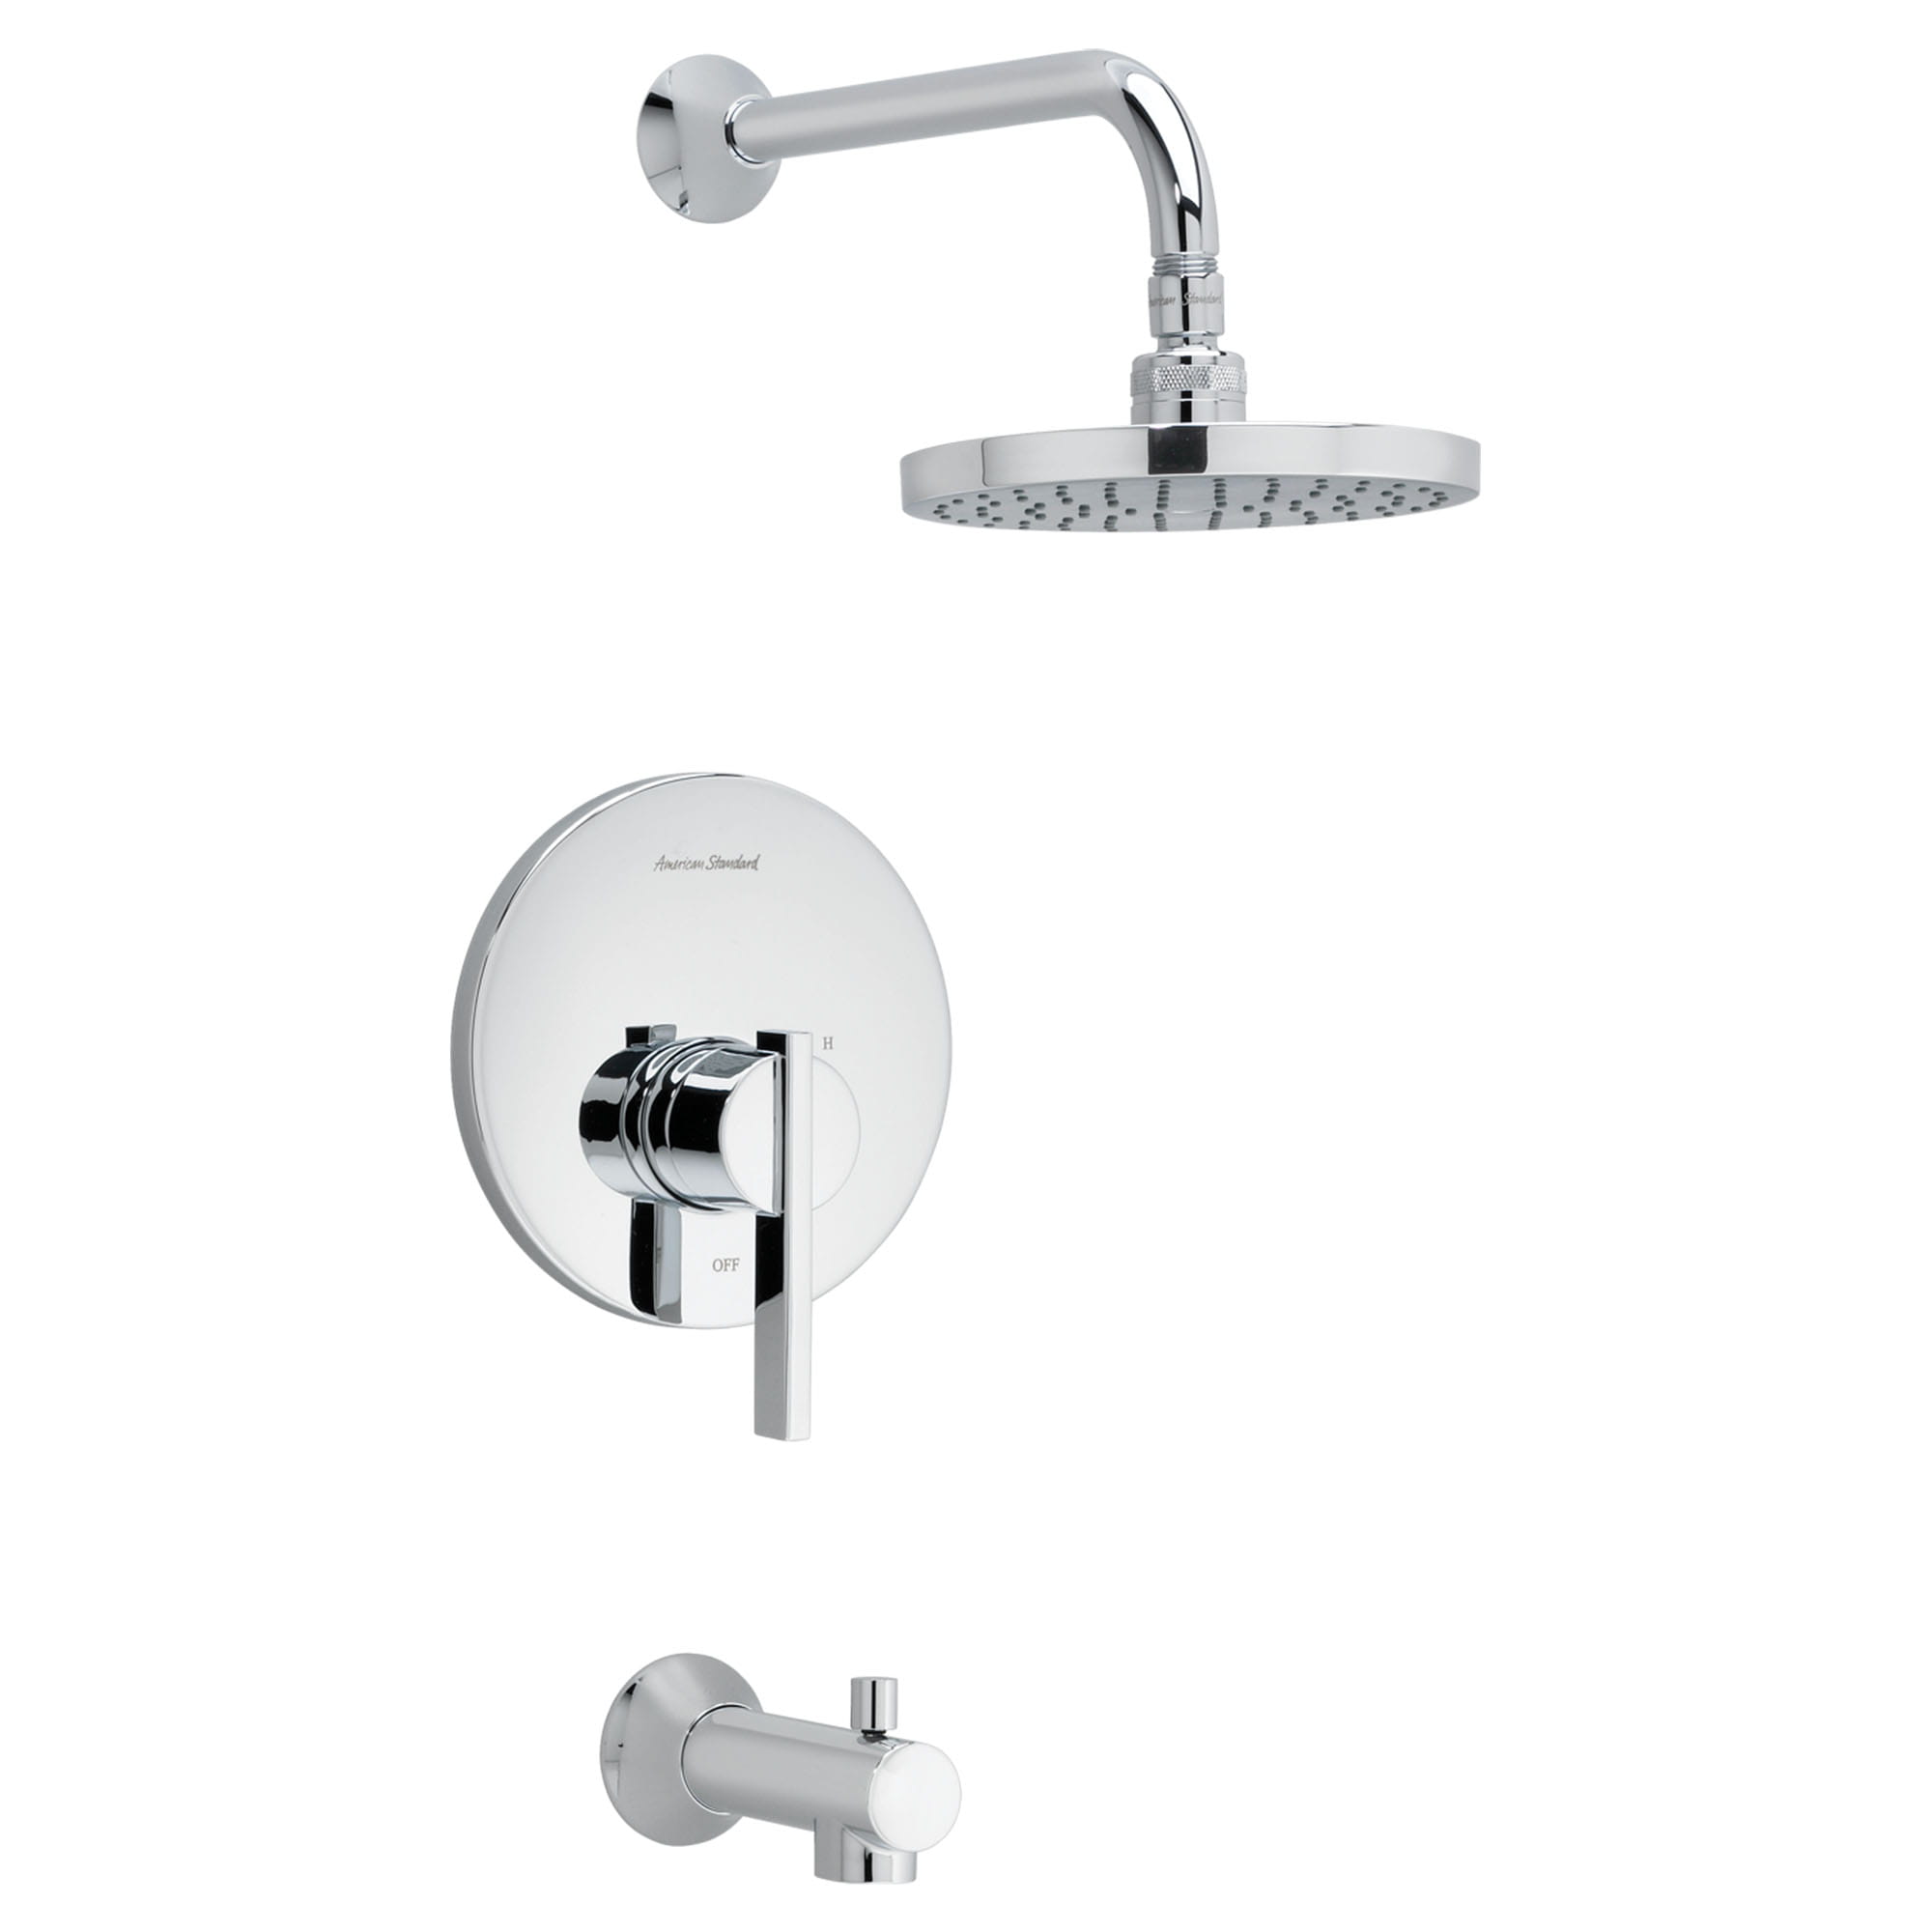 Boulevard 2.5 GPM Tub and Shower Trim Kit with Pressure Balance Cartridge and Lever Handle